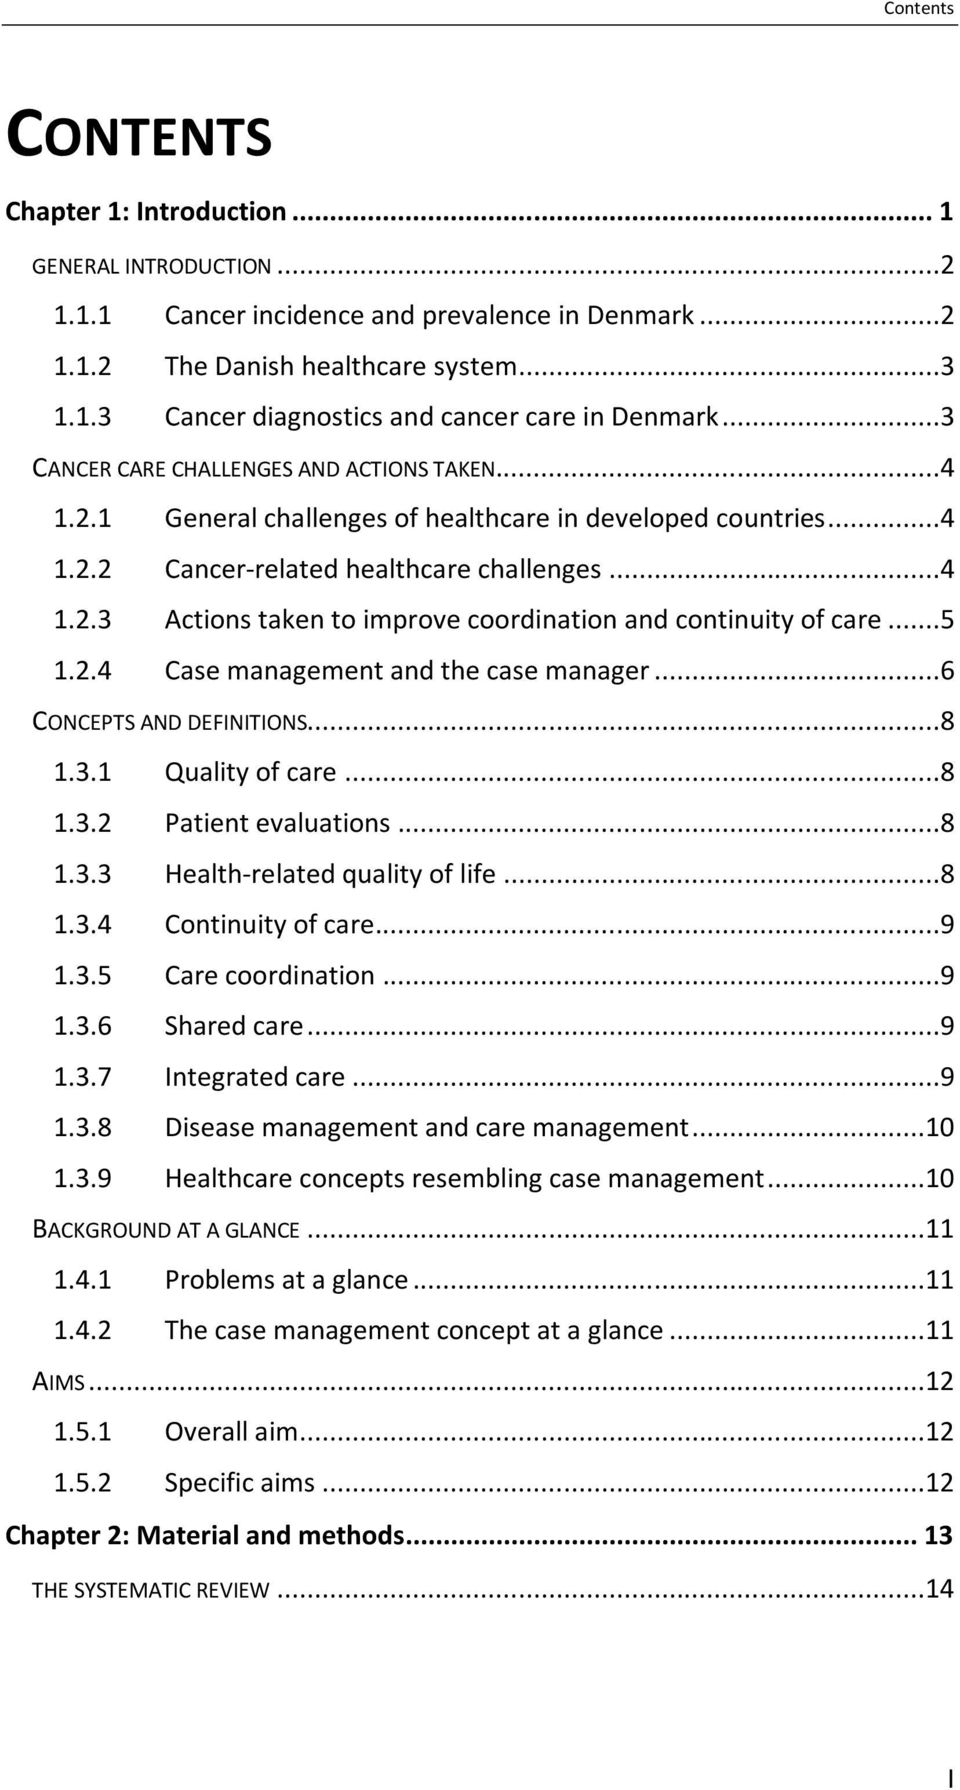 ..5 1.2.4 Case management and the case manager...6 CONCEPTS AND DEFINITIONS...8 1.3.1 Quality of care...8 1.3.2 Patient evaluations...8 1.3.3 Health-related quality of life...8 1.3.4 Continuity of care.